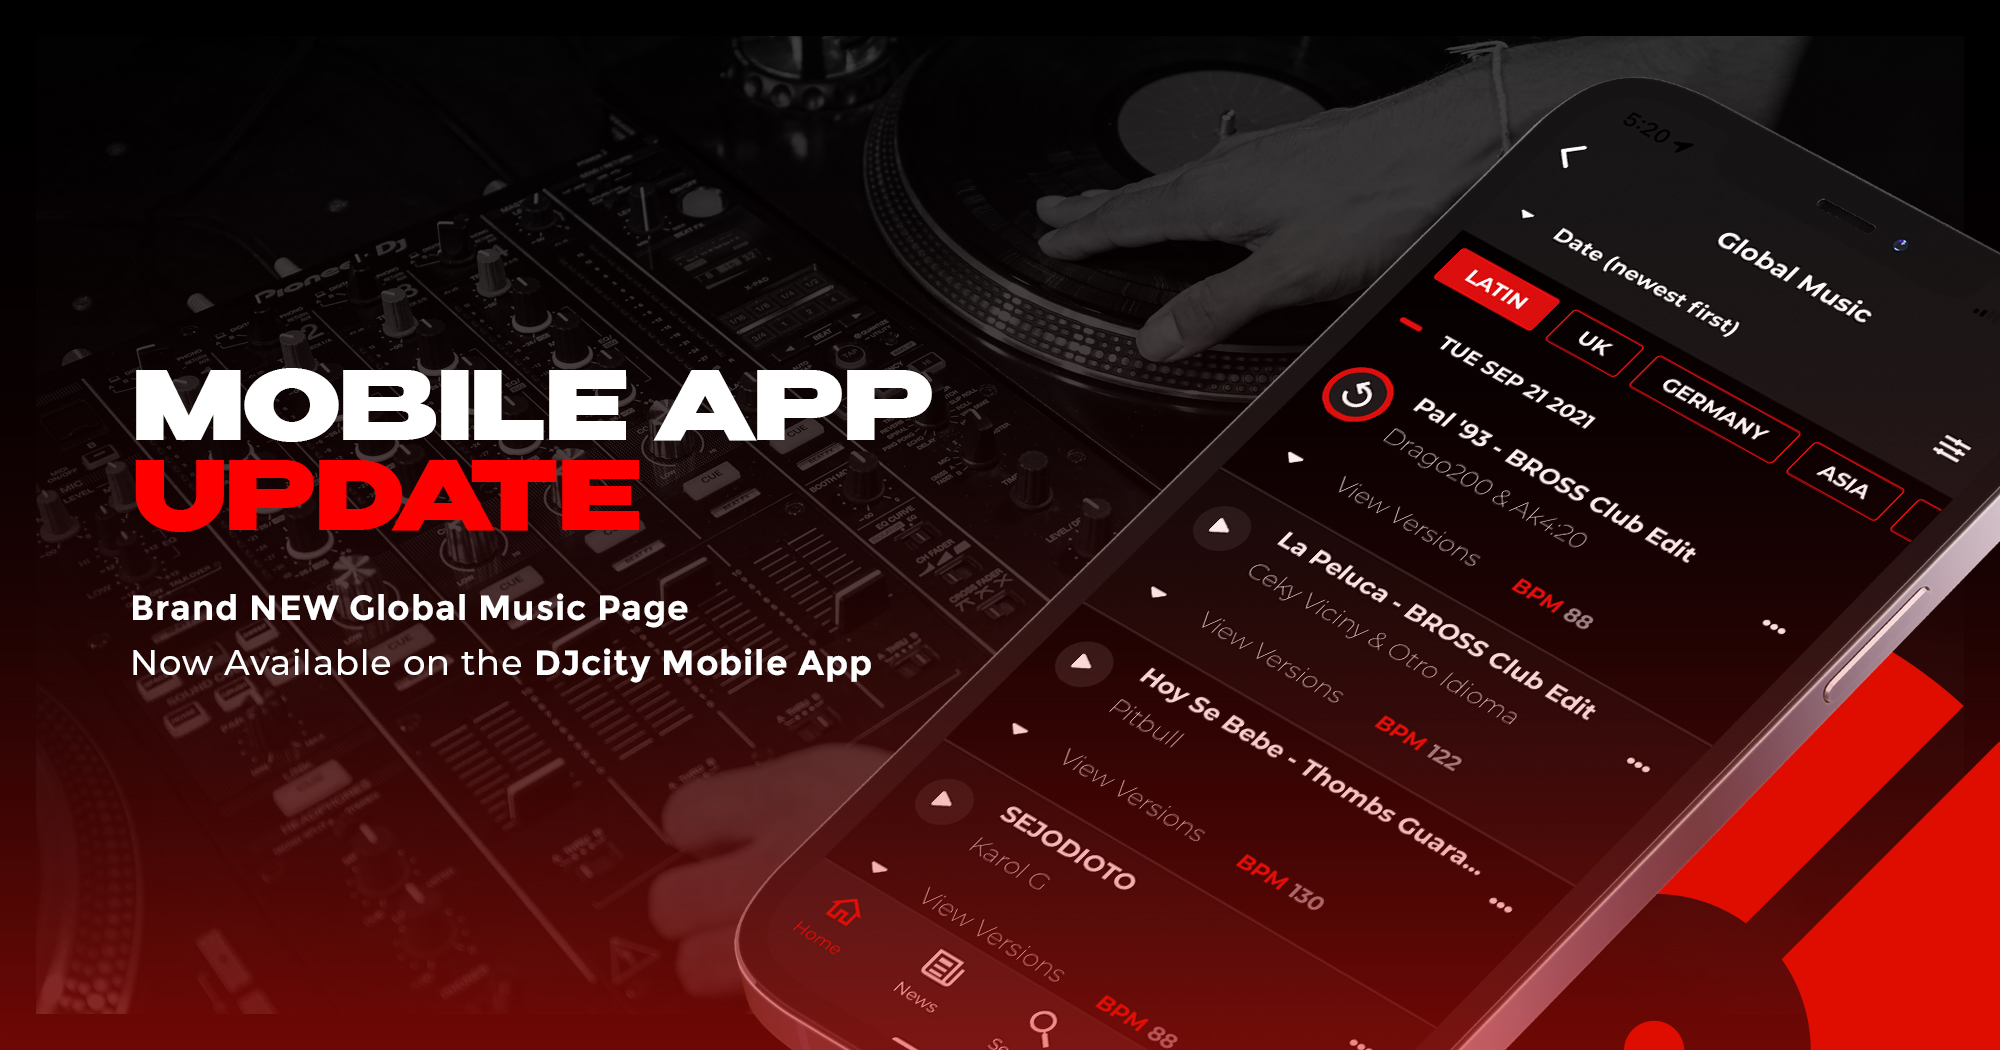 New Global Music Page Now Available On the DJcity Mobile App